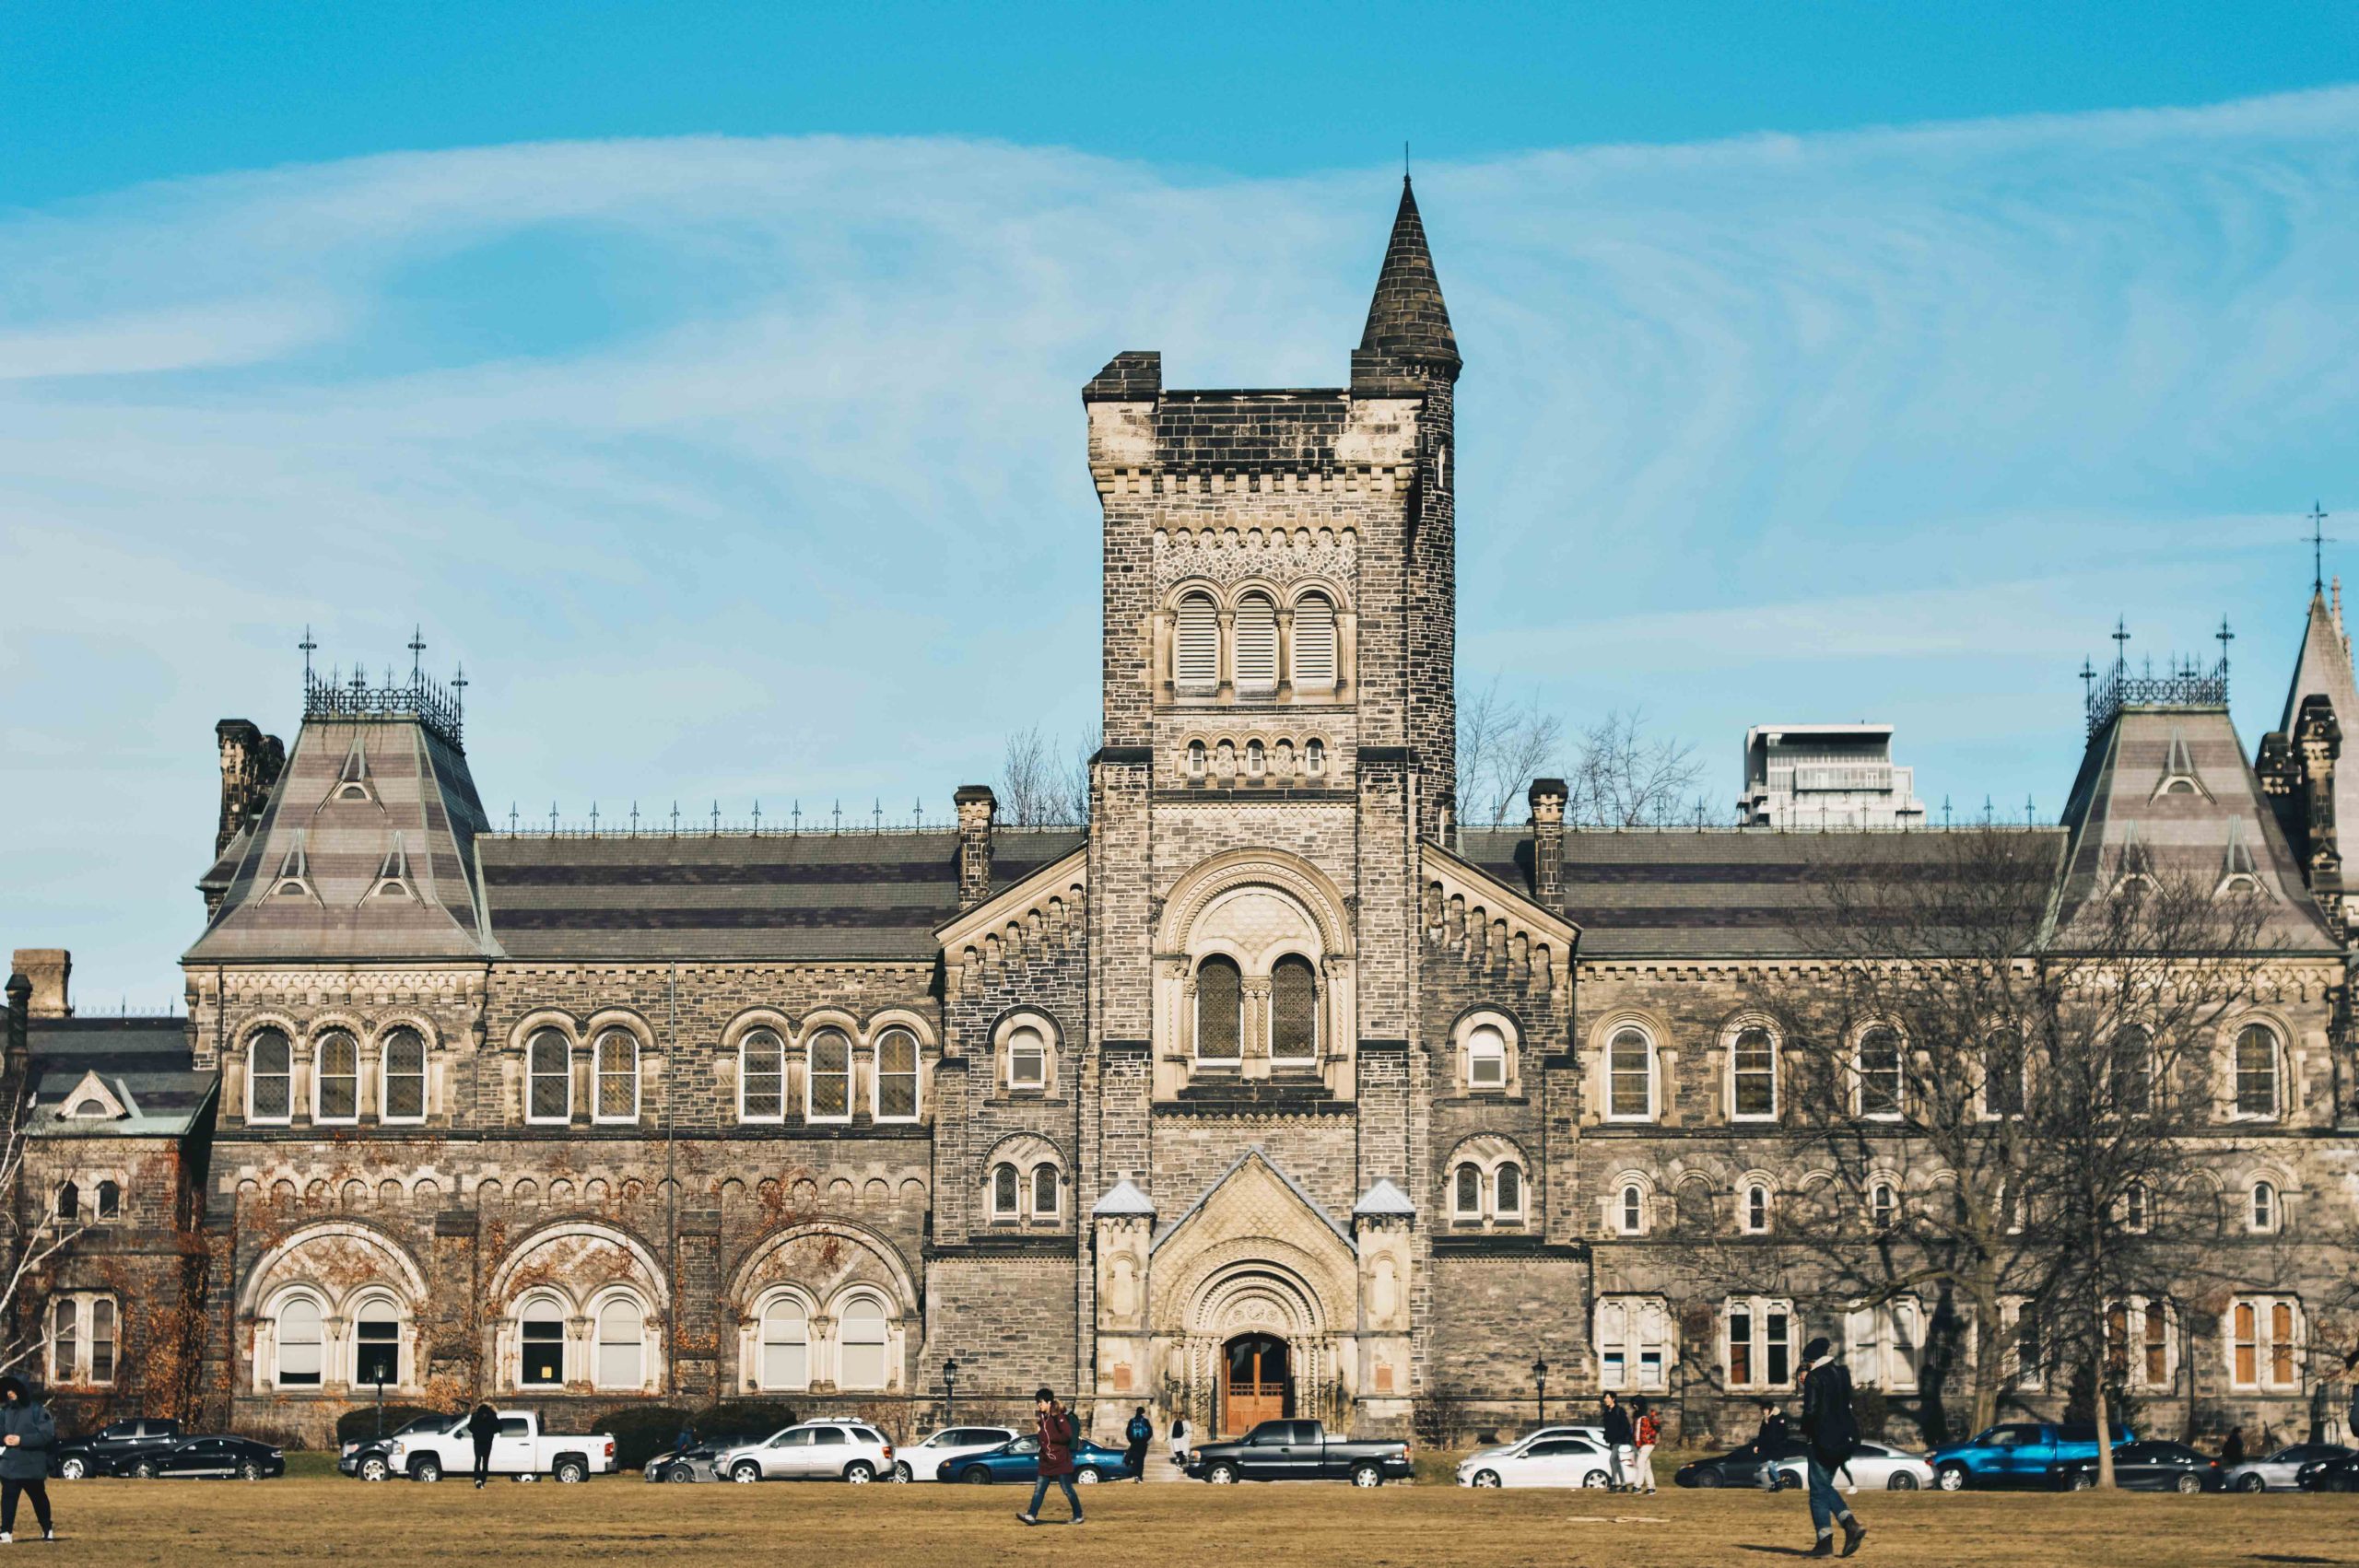 The University Of Toronto Reopens For The Fall Semester Amidst Pandemic The Strand